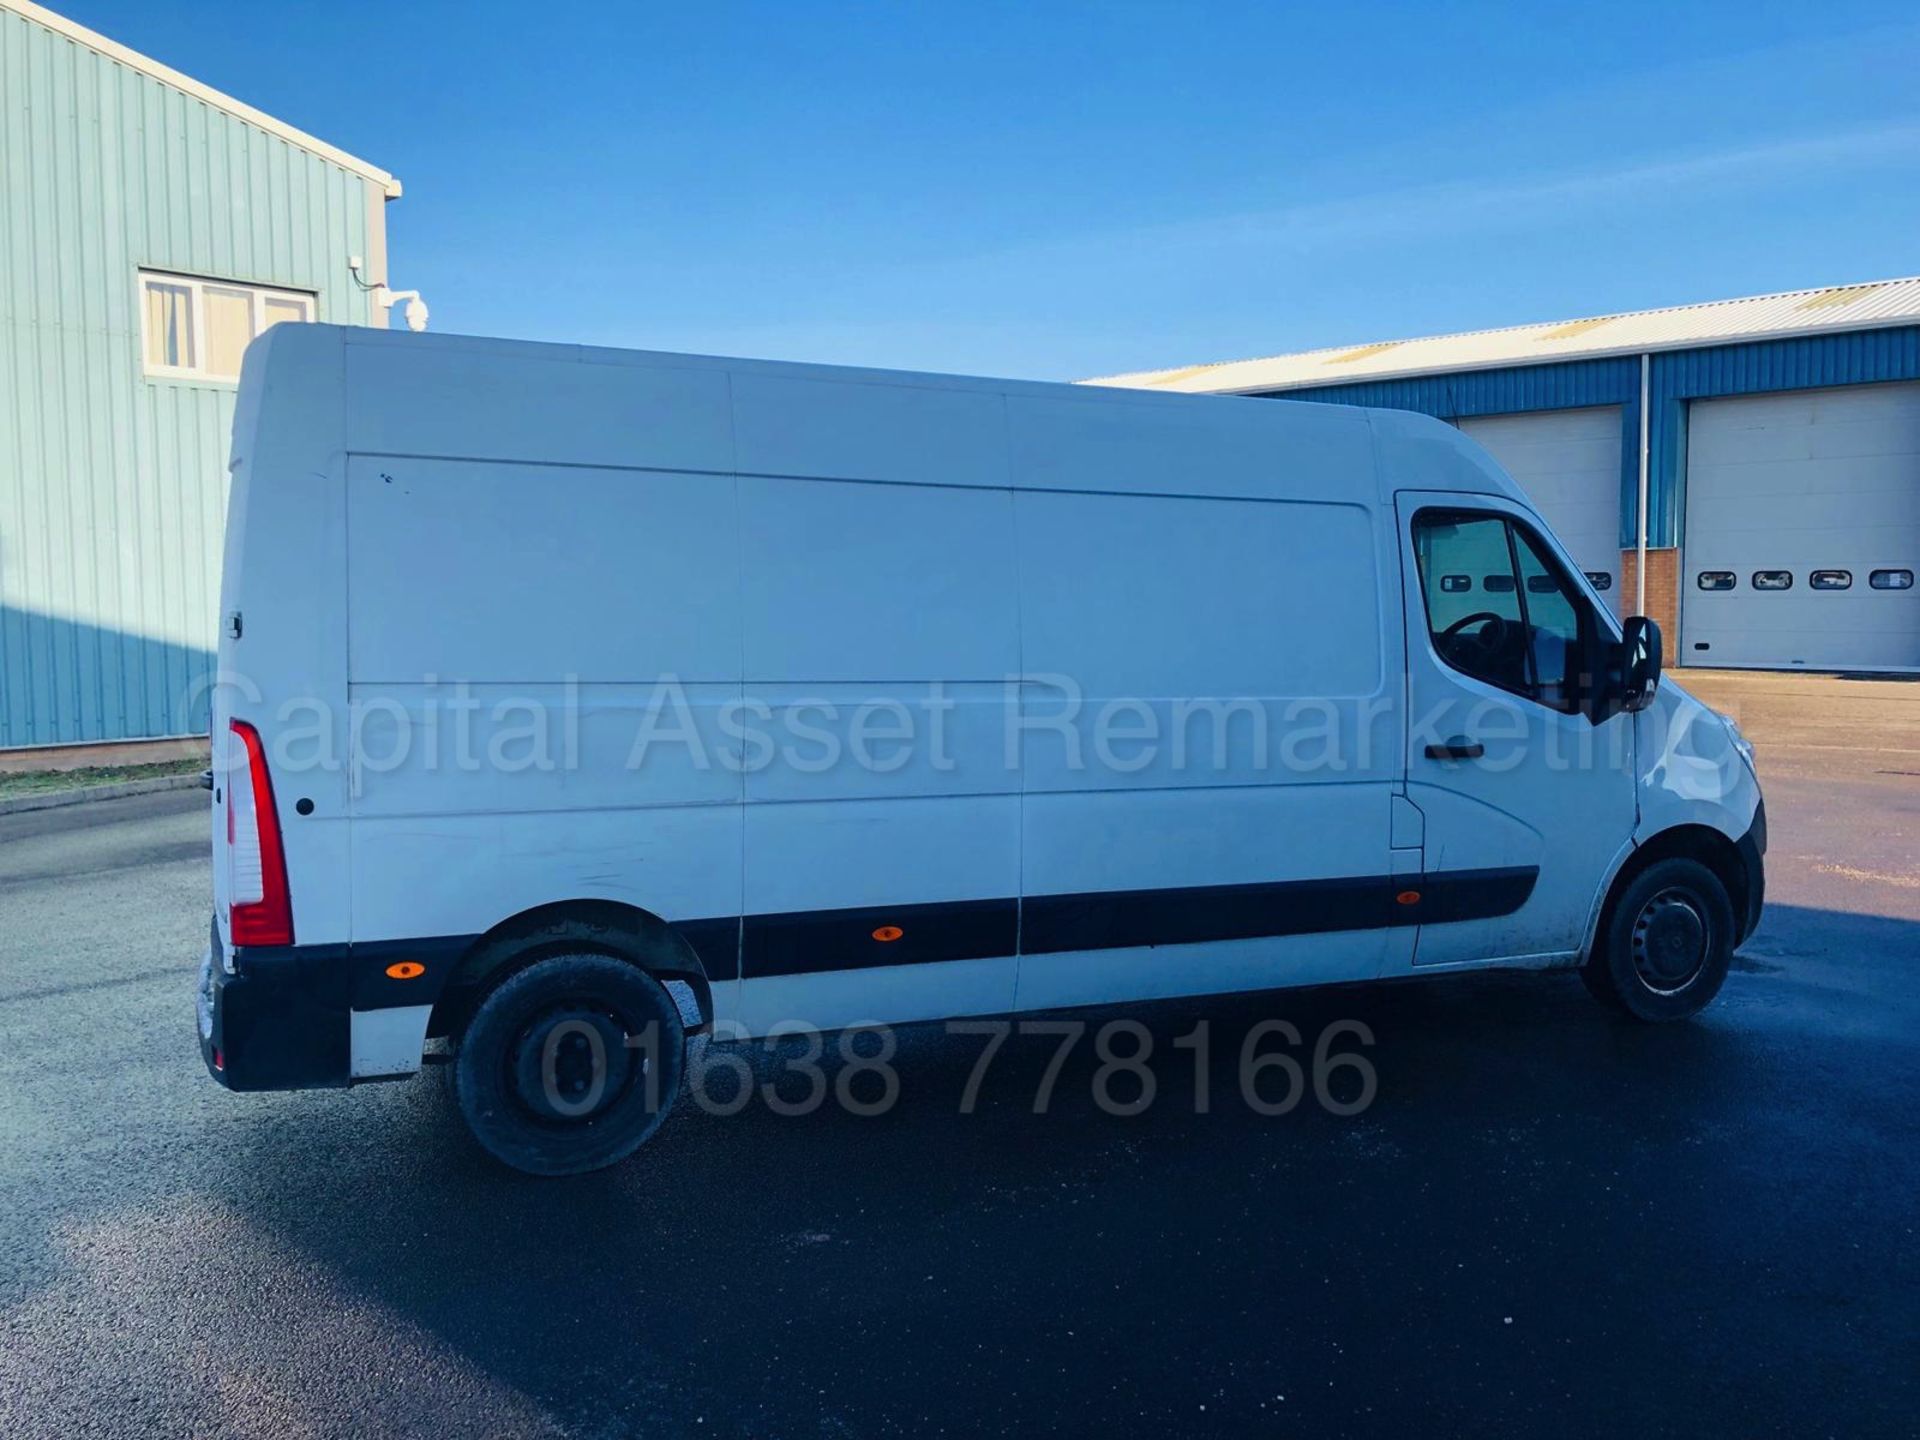 RENAULT MASTER LM35 *LWB - BUSINESS EDITION* (2016) '2.3 DCI - 110 BHP - 6 SPEED' *ULTRA LOW MILES* - Image 9 of 23